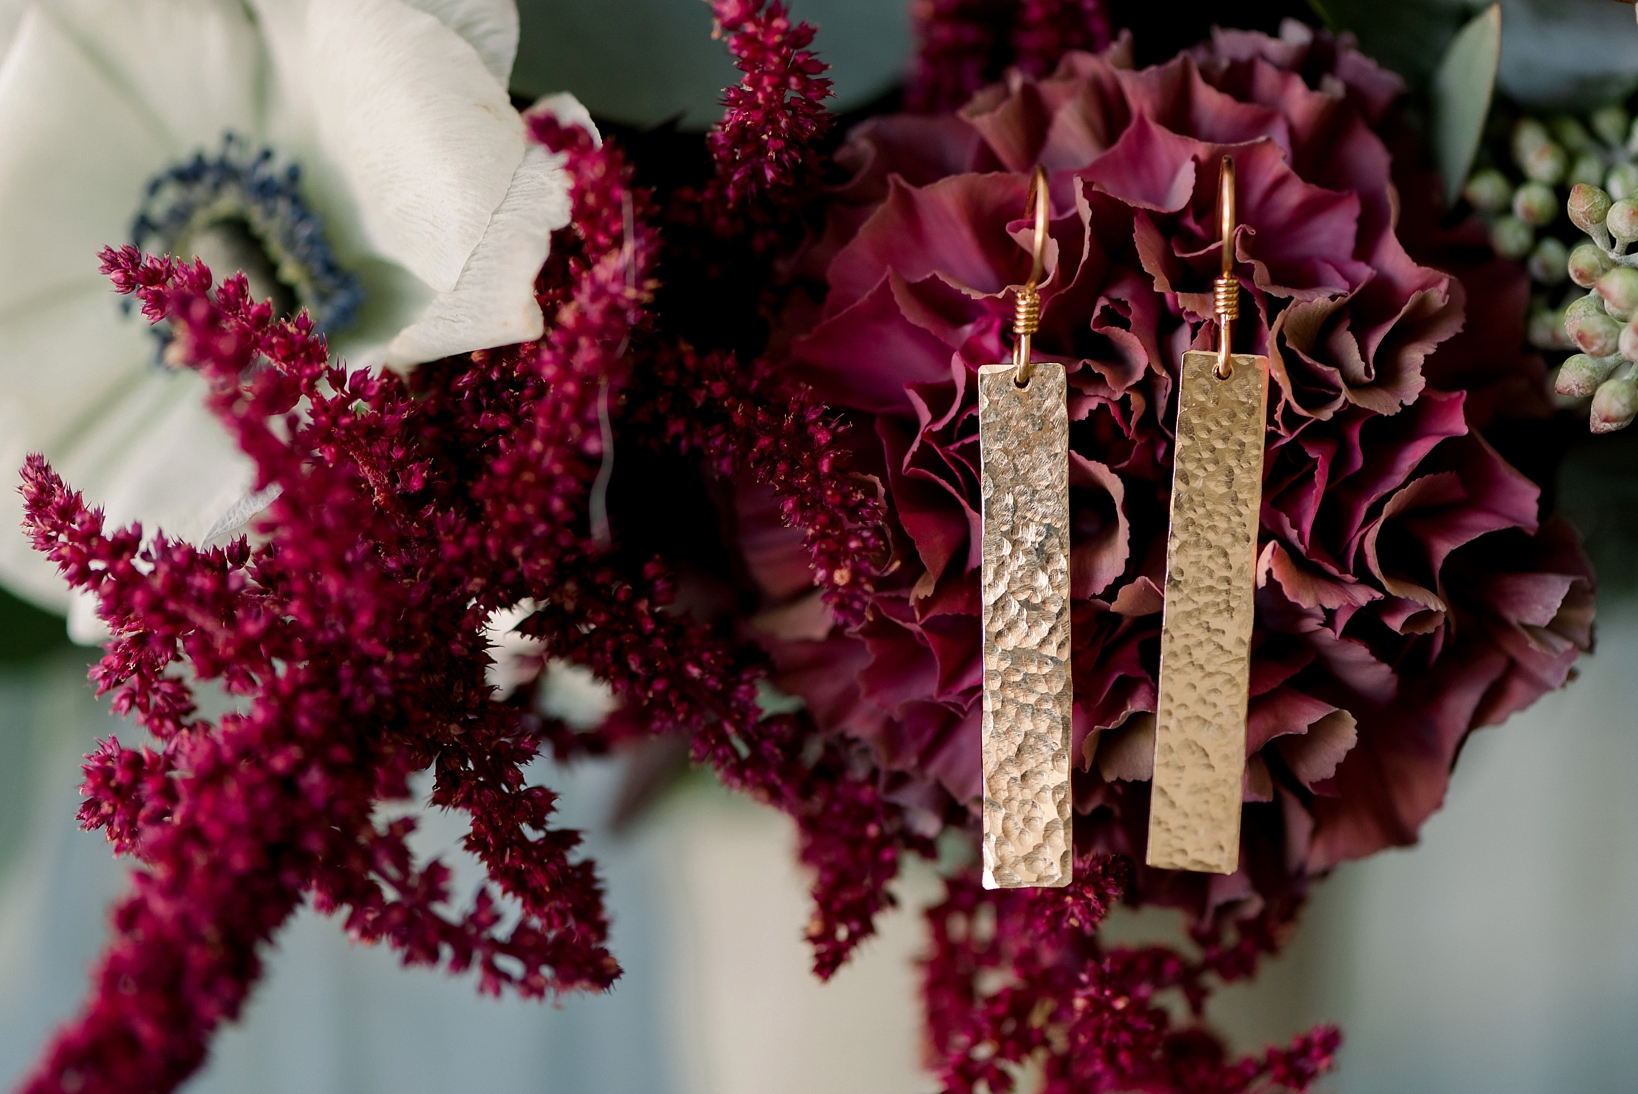 Gold bar earrings dangle from the bride's florals on her wedding day